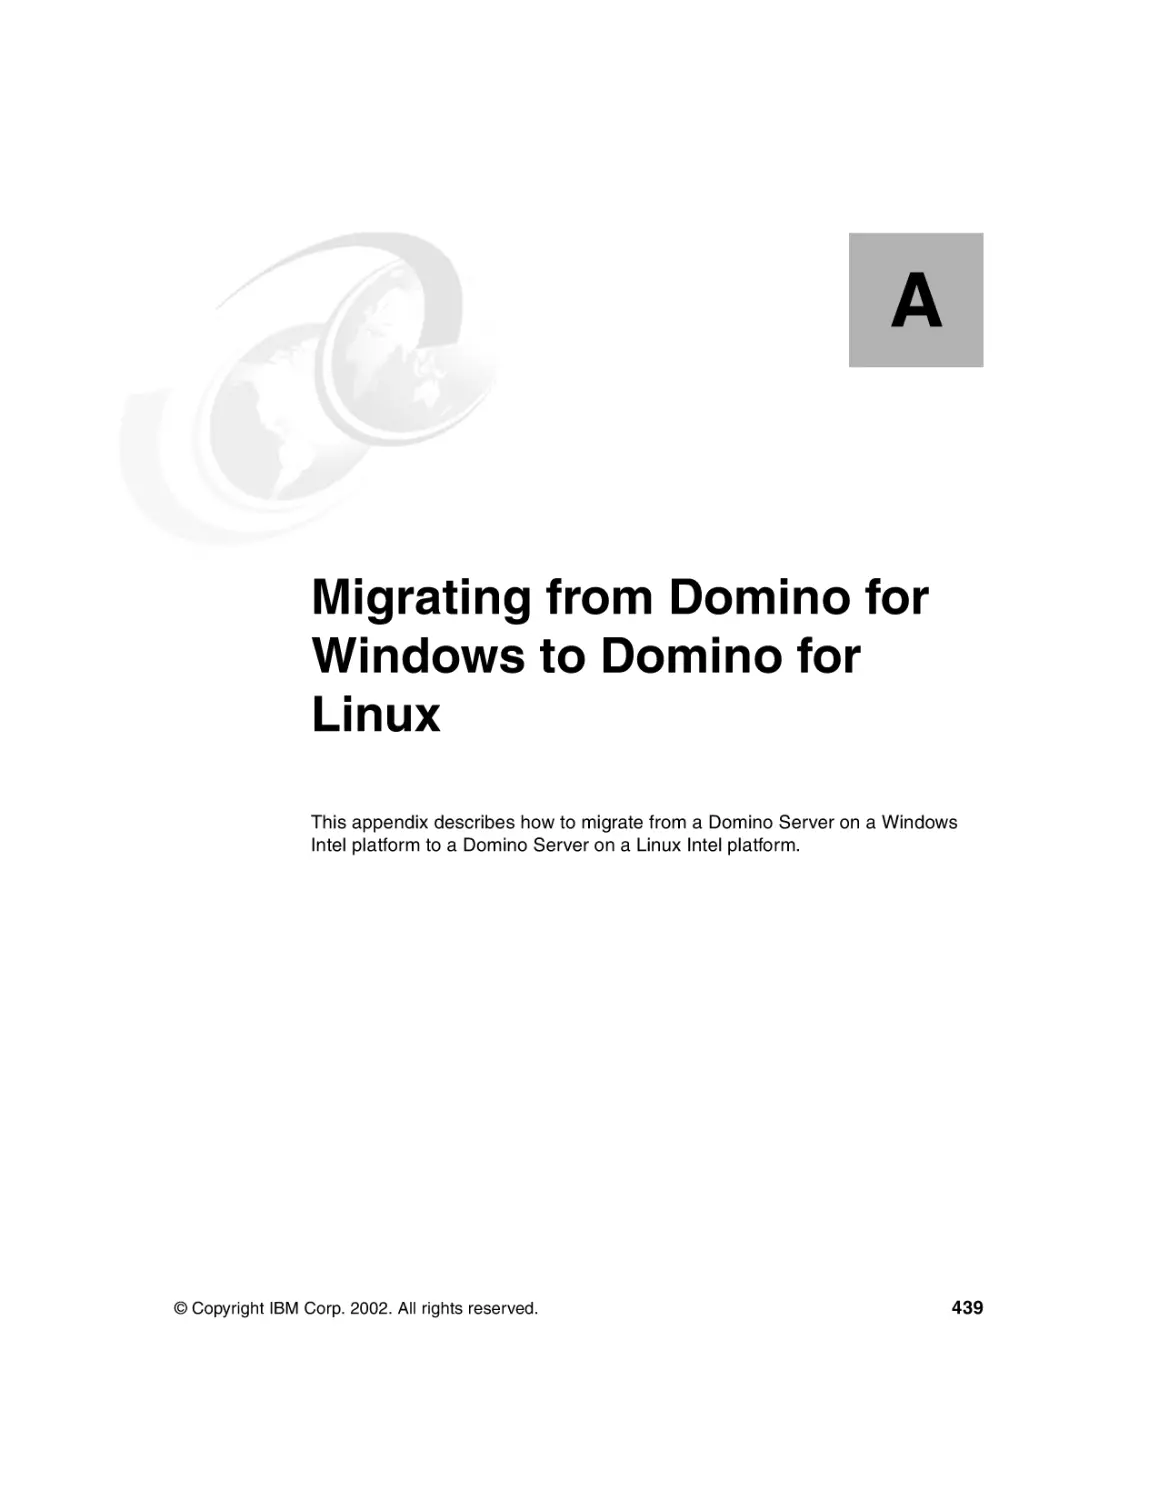 Appendix A. Migrating from Domino for Windows to Domino for Linux